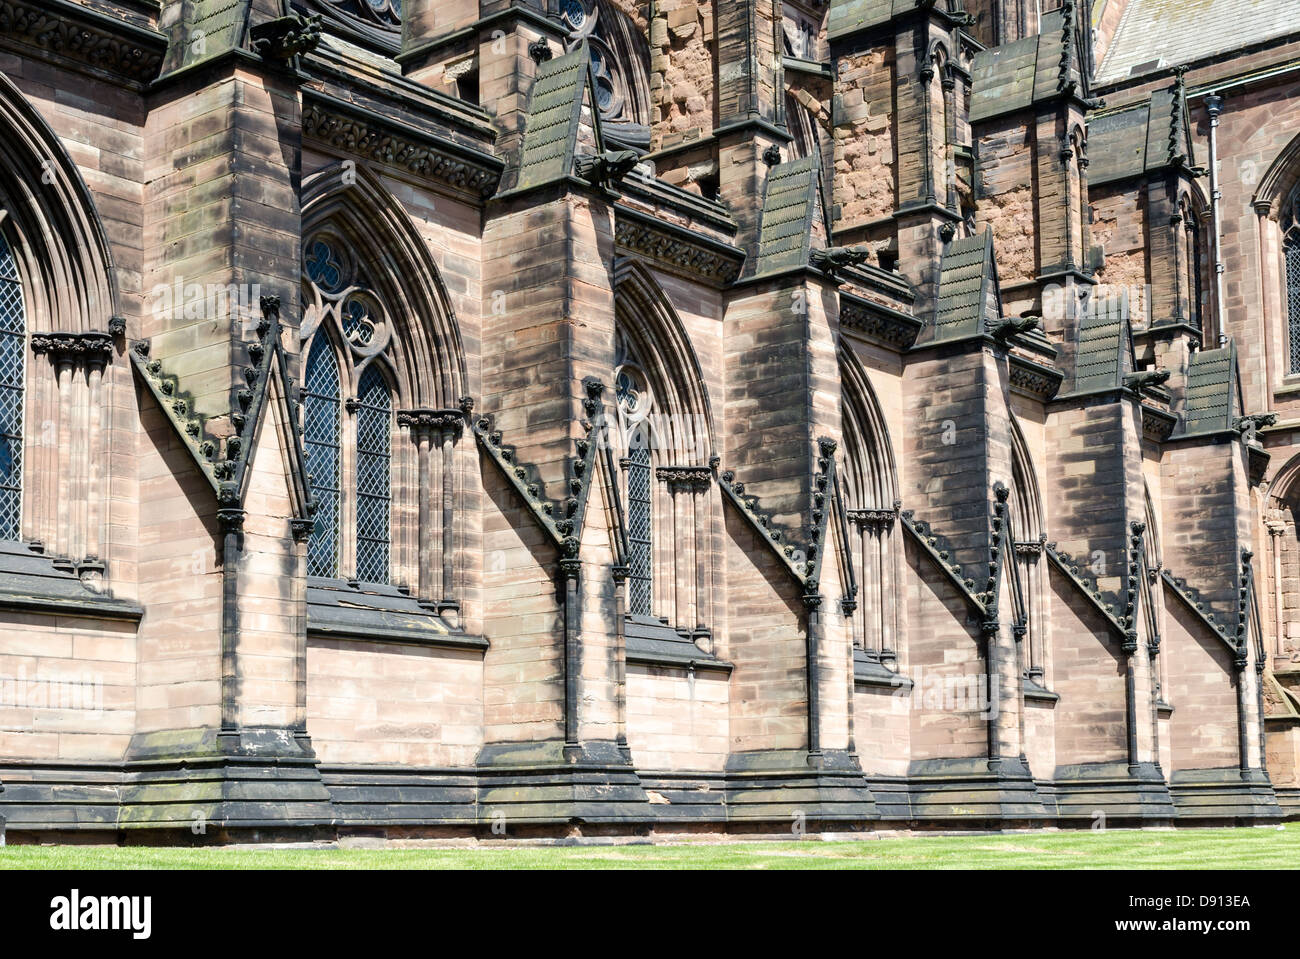 The Gothic architecture of Lichfield Cathedral which is built from sandstone Stock Photo